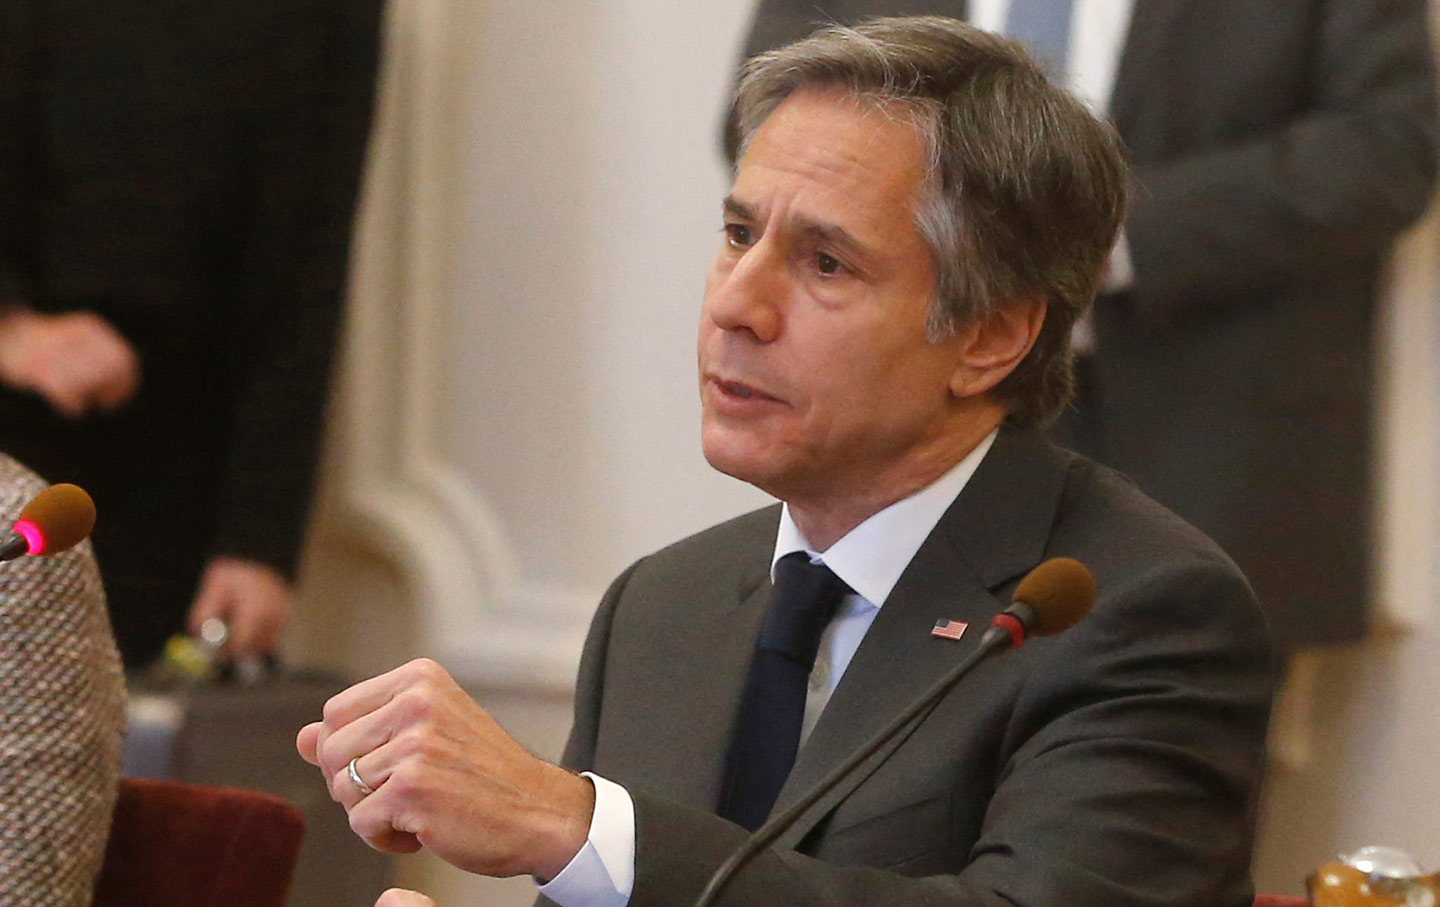 Secretary Blinken Faces a Big Test in Ukraine, Where Nazis and Their Sympathizers Are Glorified